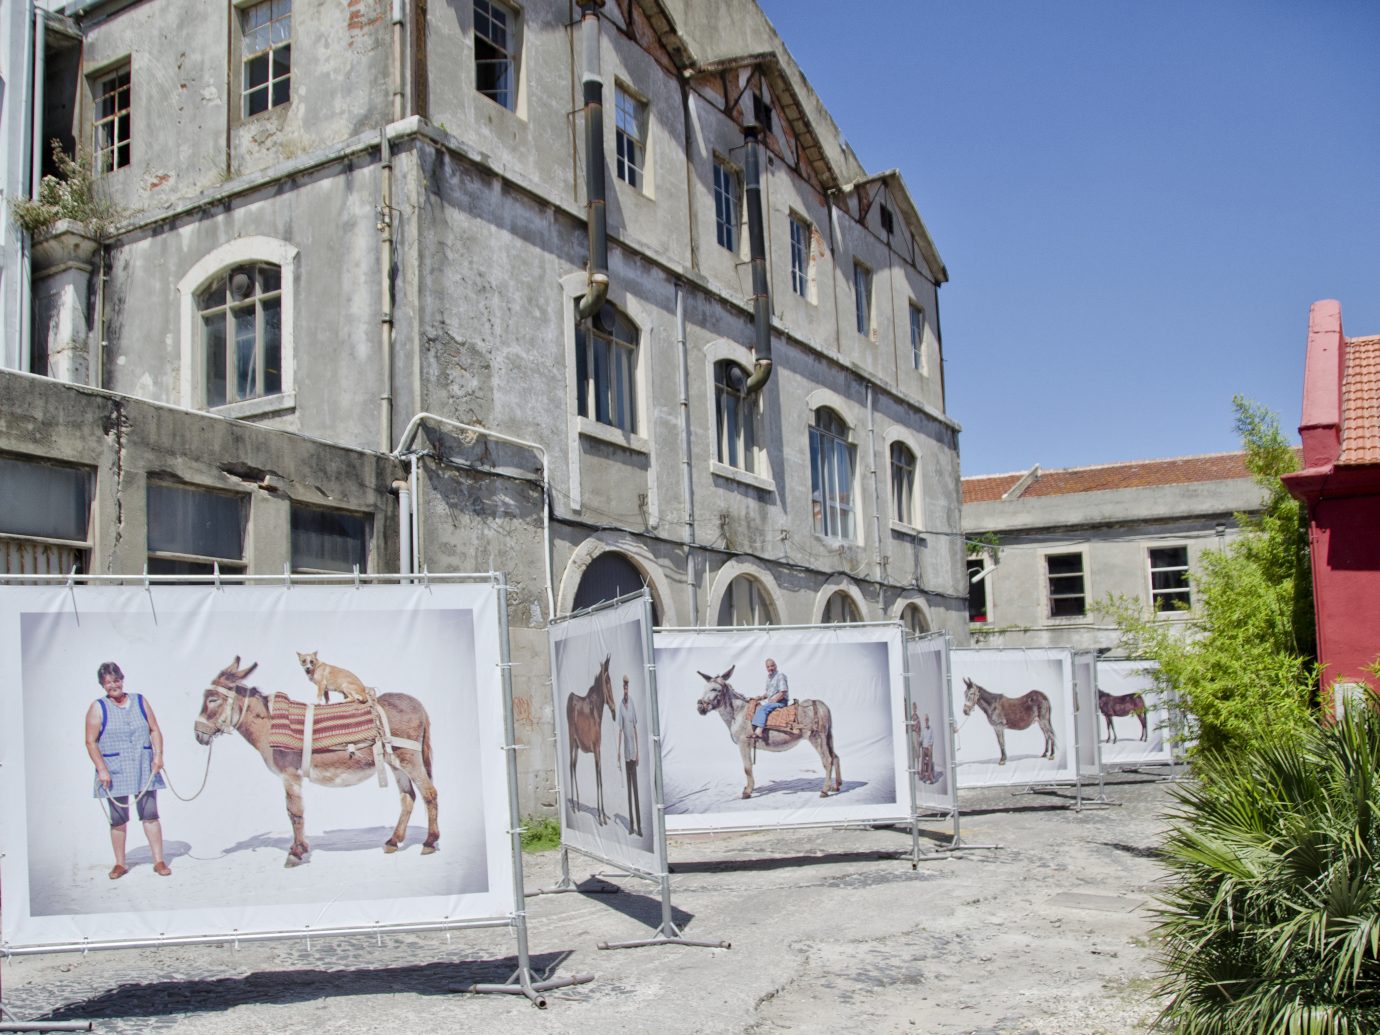 Open day at LX Factory with an outdoor art installation featuring large animals on white cloth